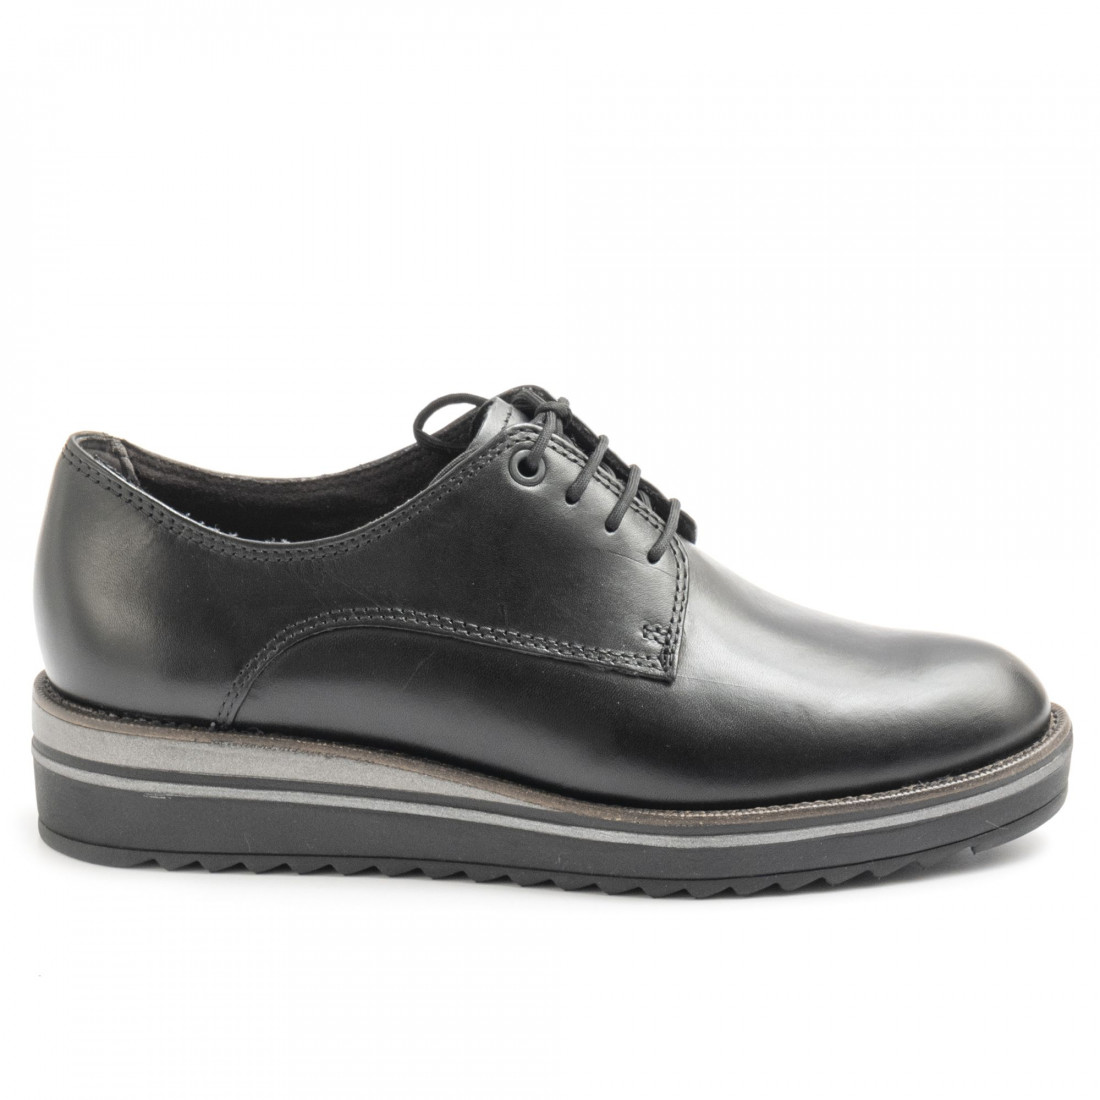 Women's Tamaris derby shoes in leather